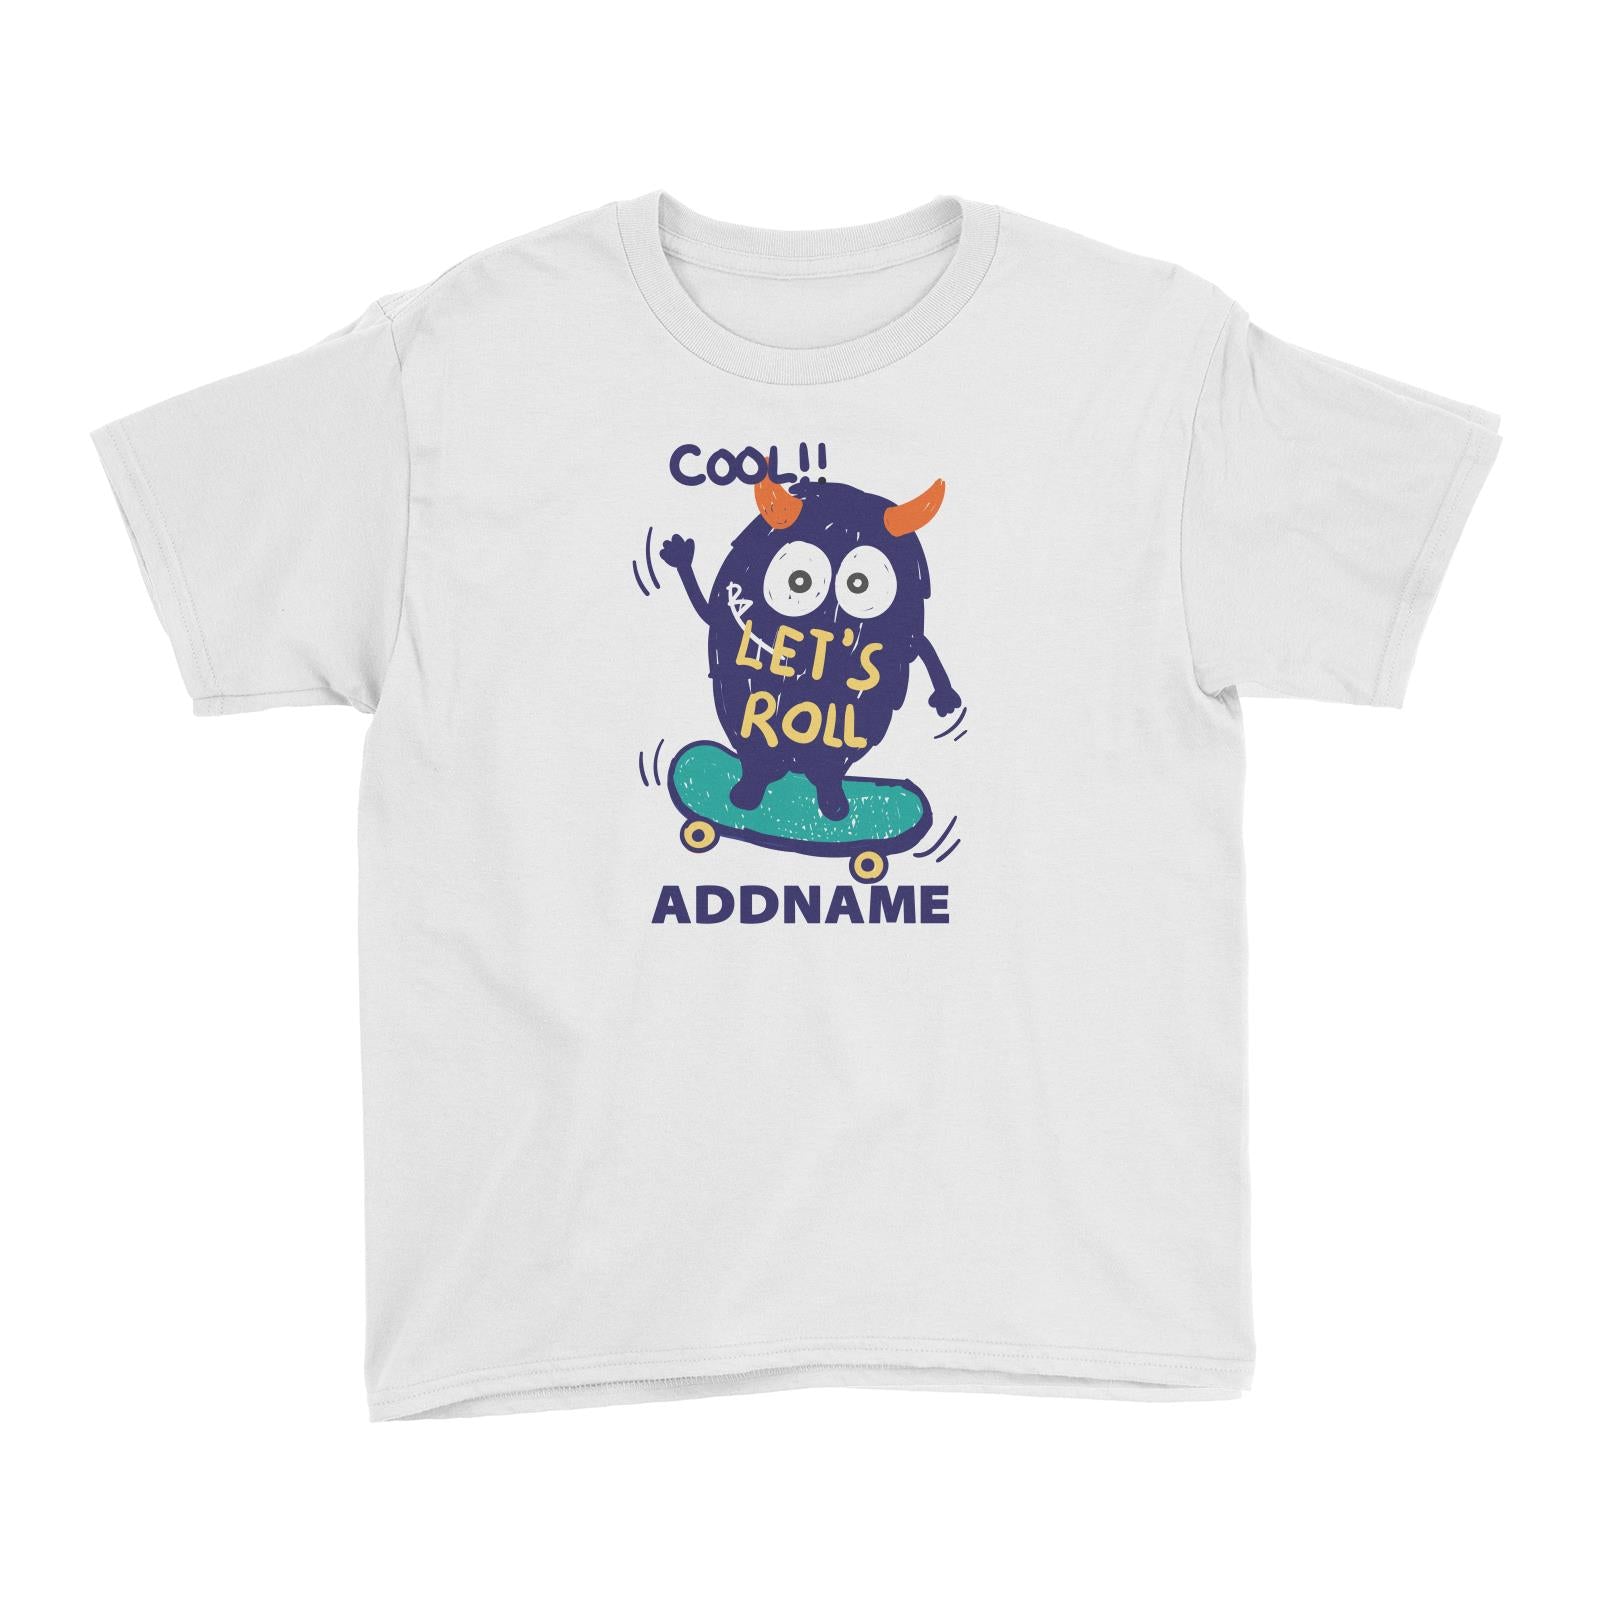 Cool Cute Monster Cool Let's Roll Monster Addname Kid's T-Shirts